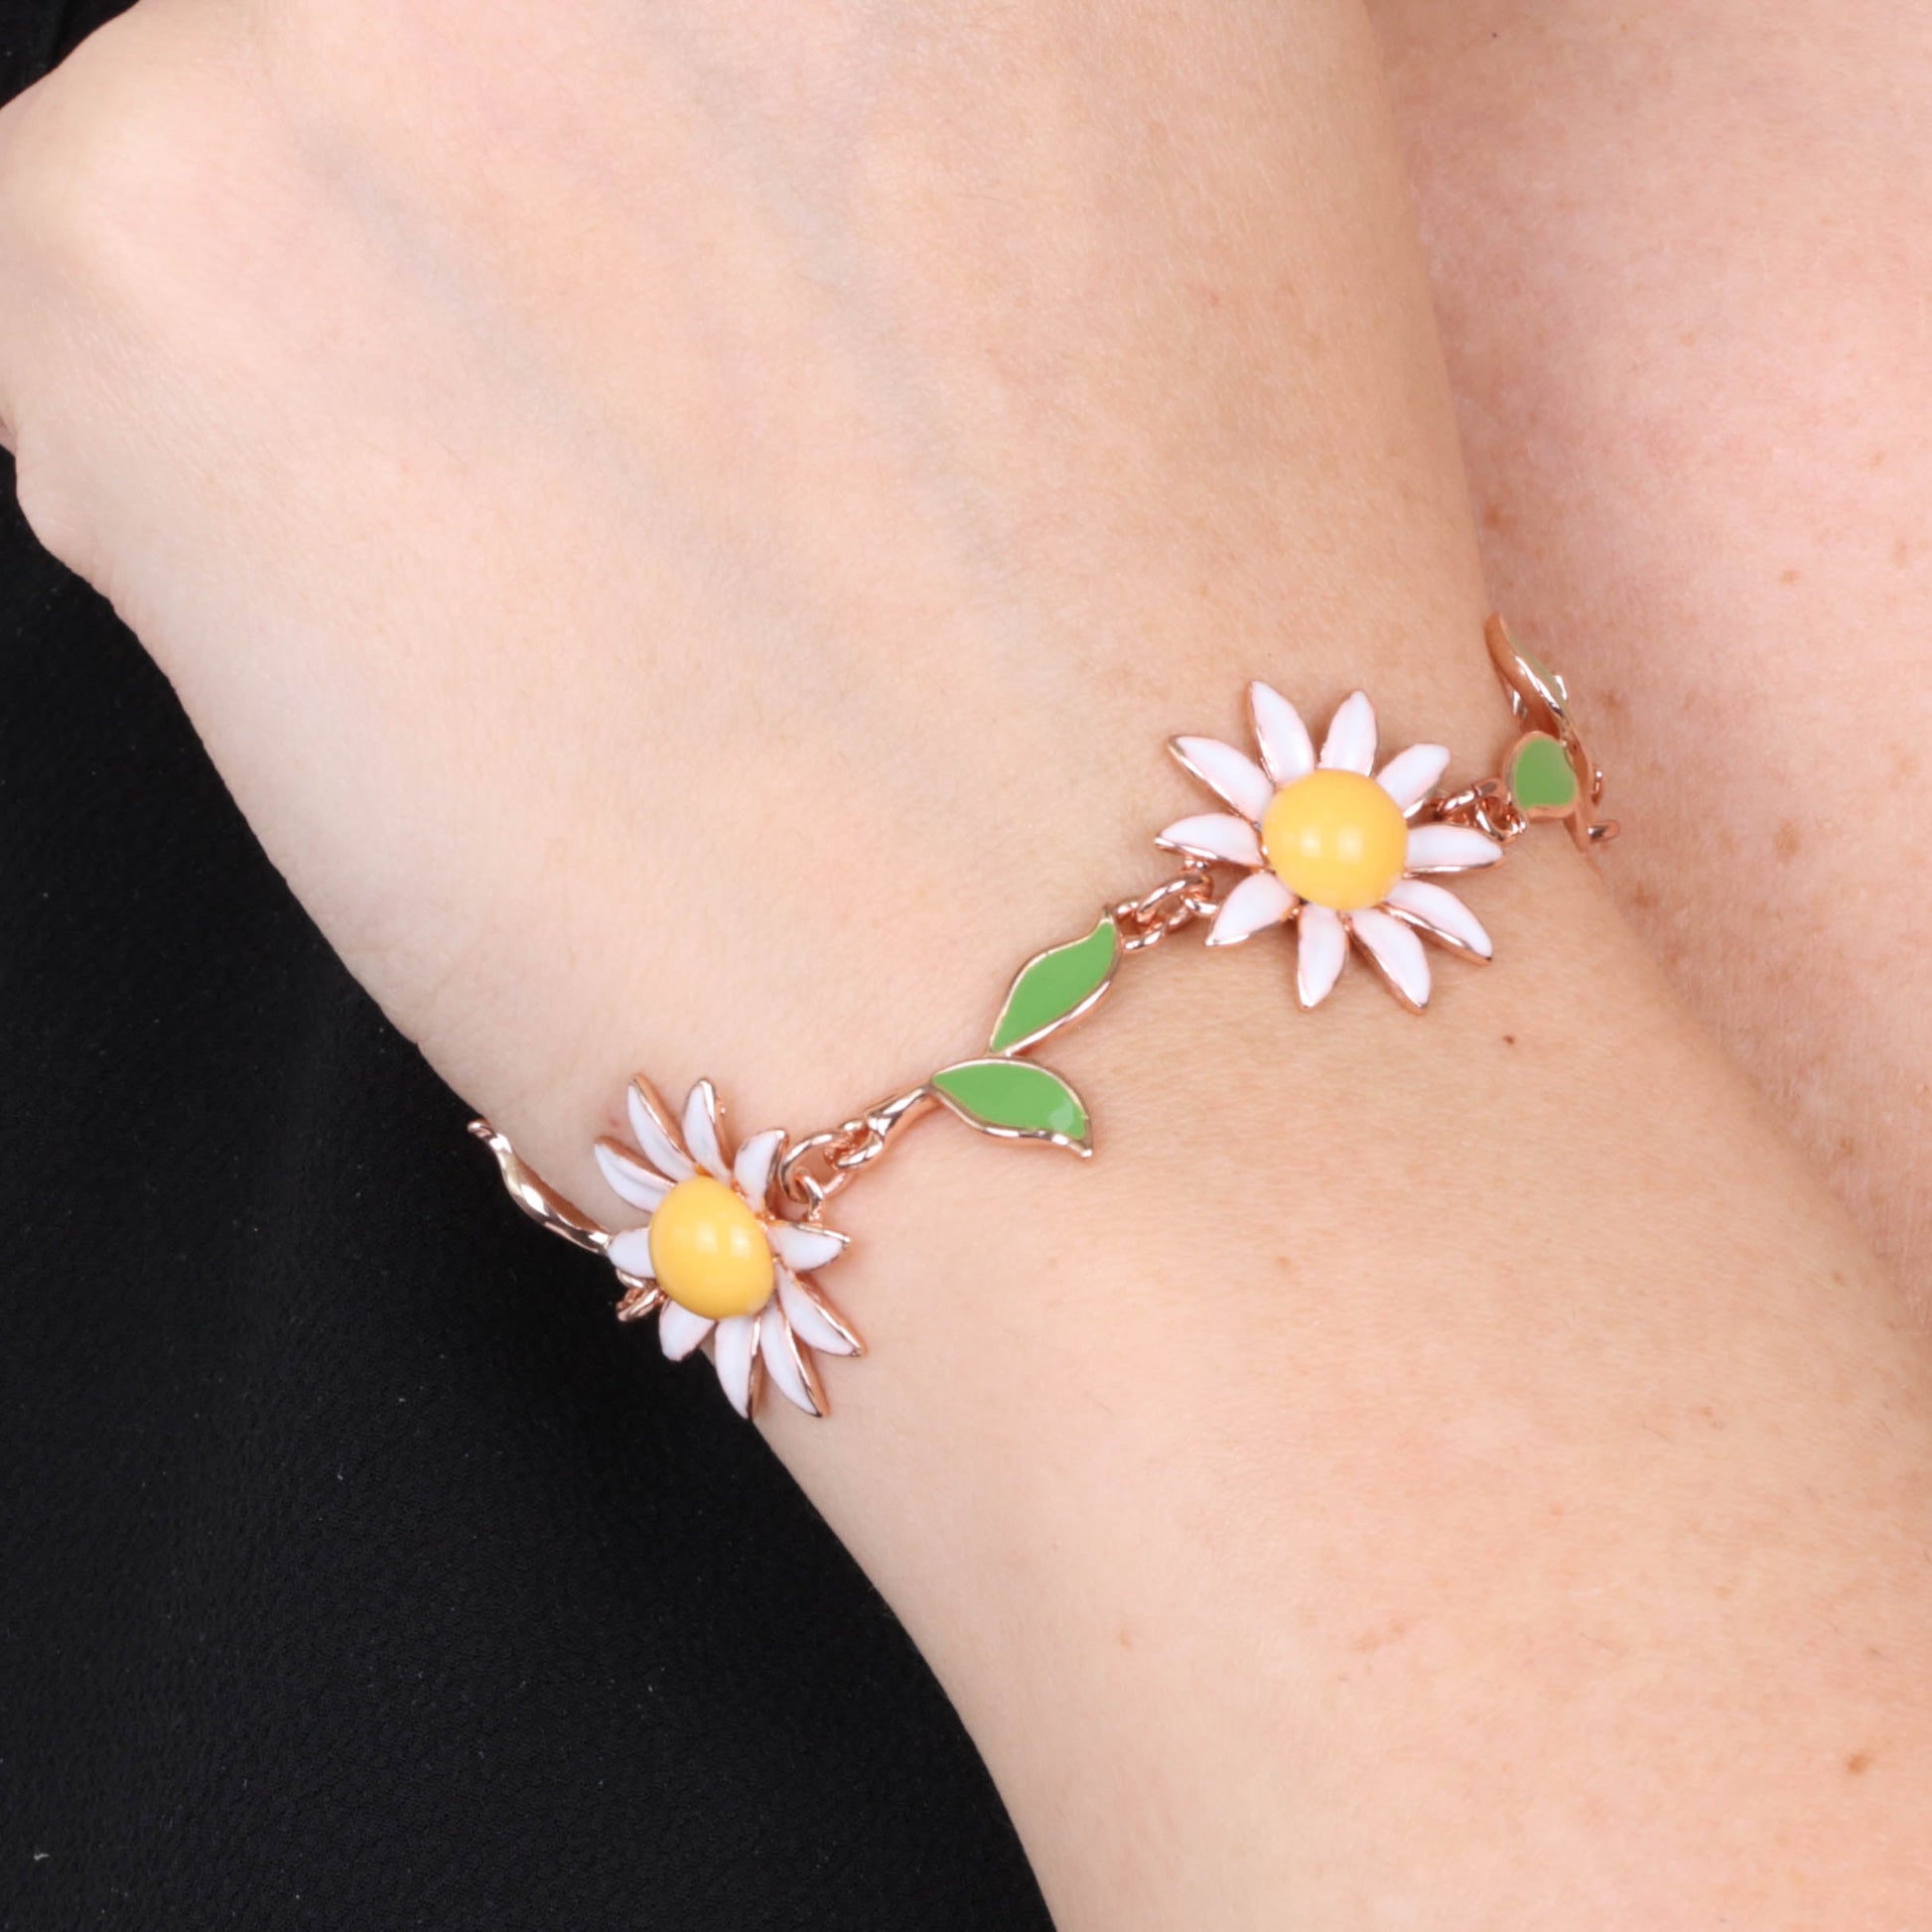 Metal bracelet Rolò jersey with tris of daisies and leaves, embellished with colored glazes